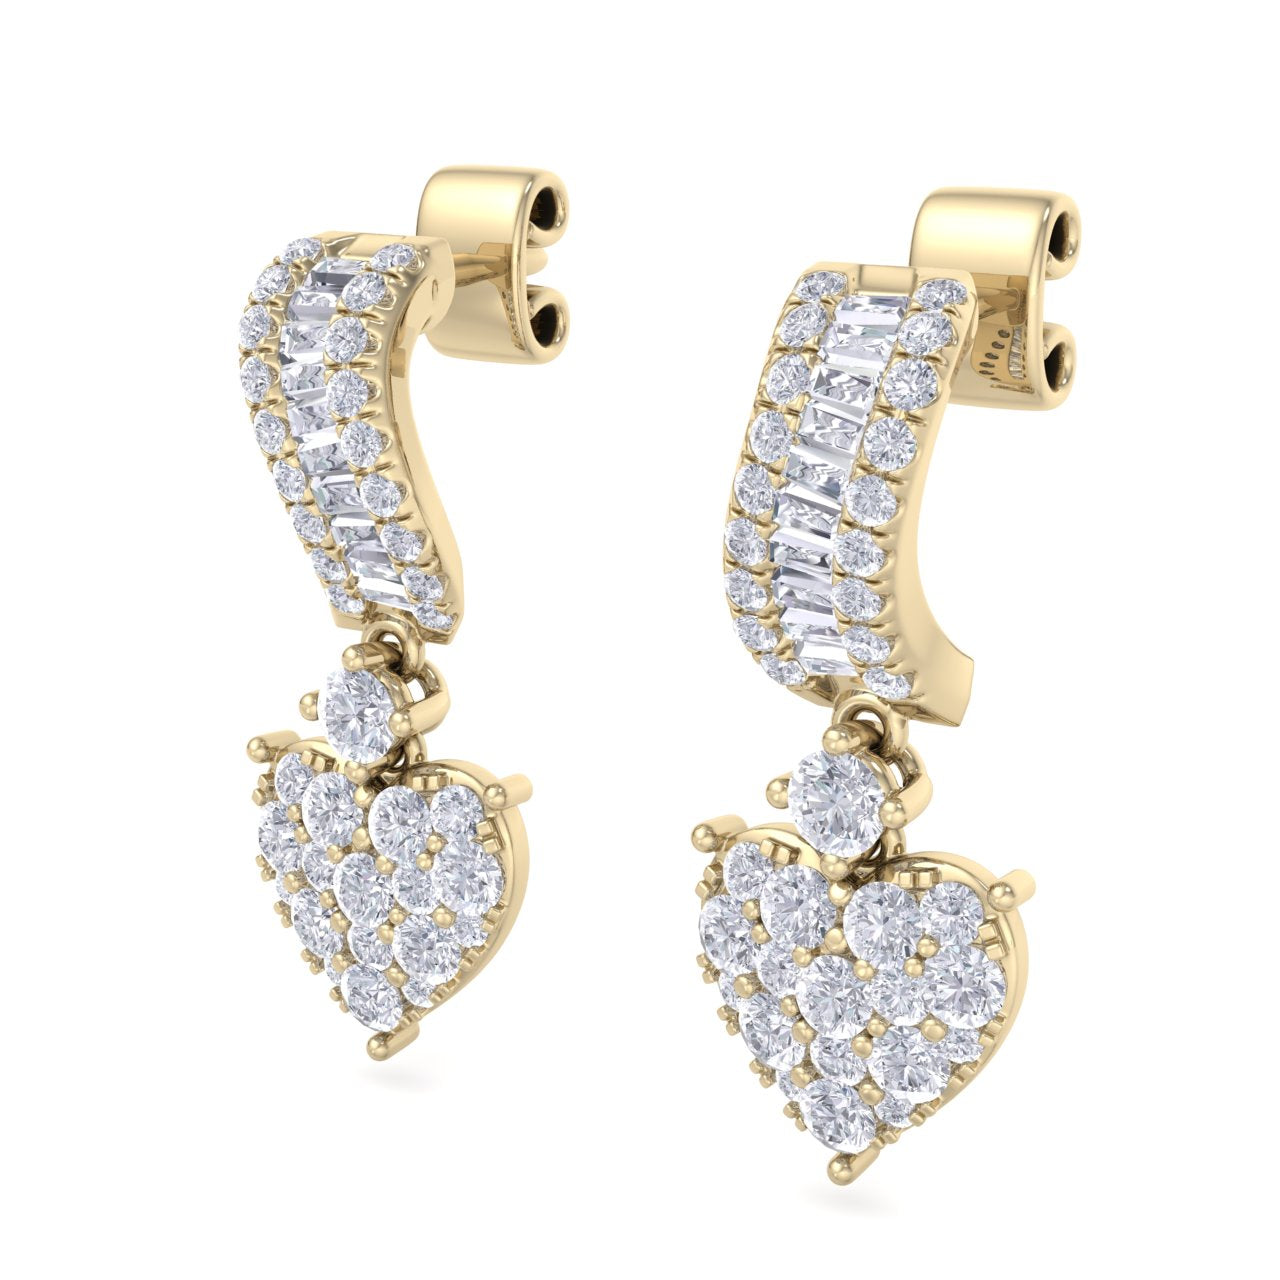 Drop earrings in rose gold with white diamonds of 1.09 ct in weight